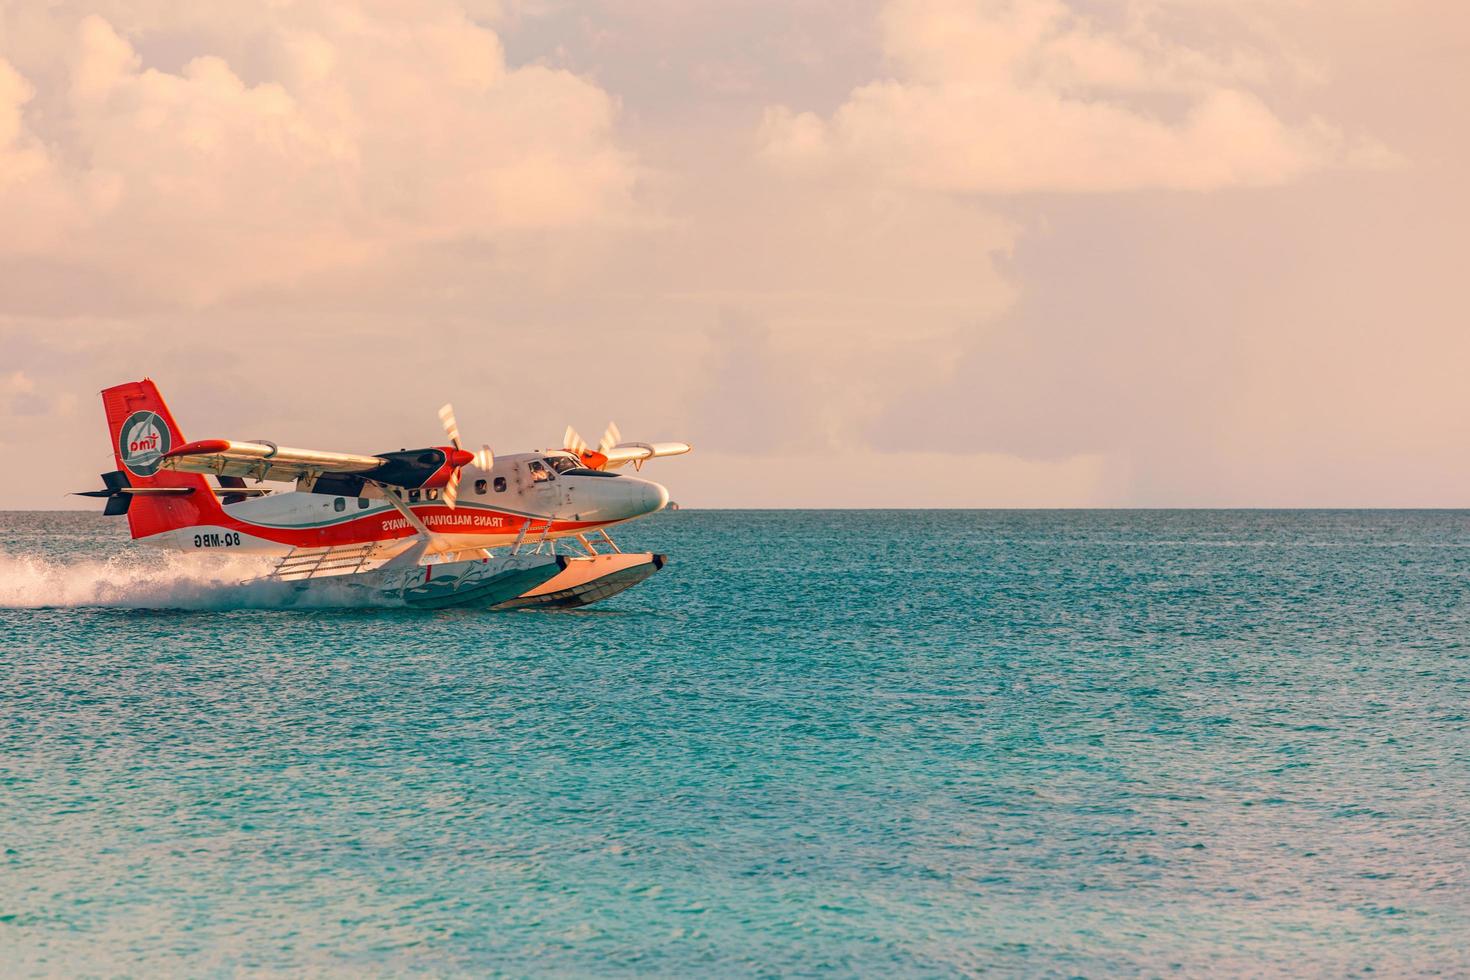 06.01.2019 - Ari Atoll, Maldives Exotic scene with seaplane on Maldives sea landing. Vacation or holiday in Maldives concept background. Cool sunset photo. Exotic transportation, airline as seaplane photo